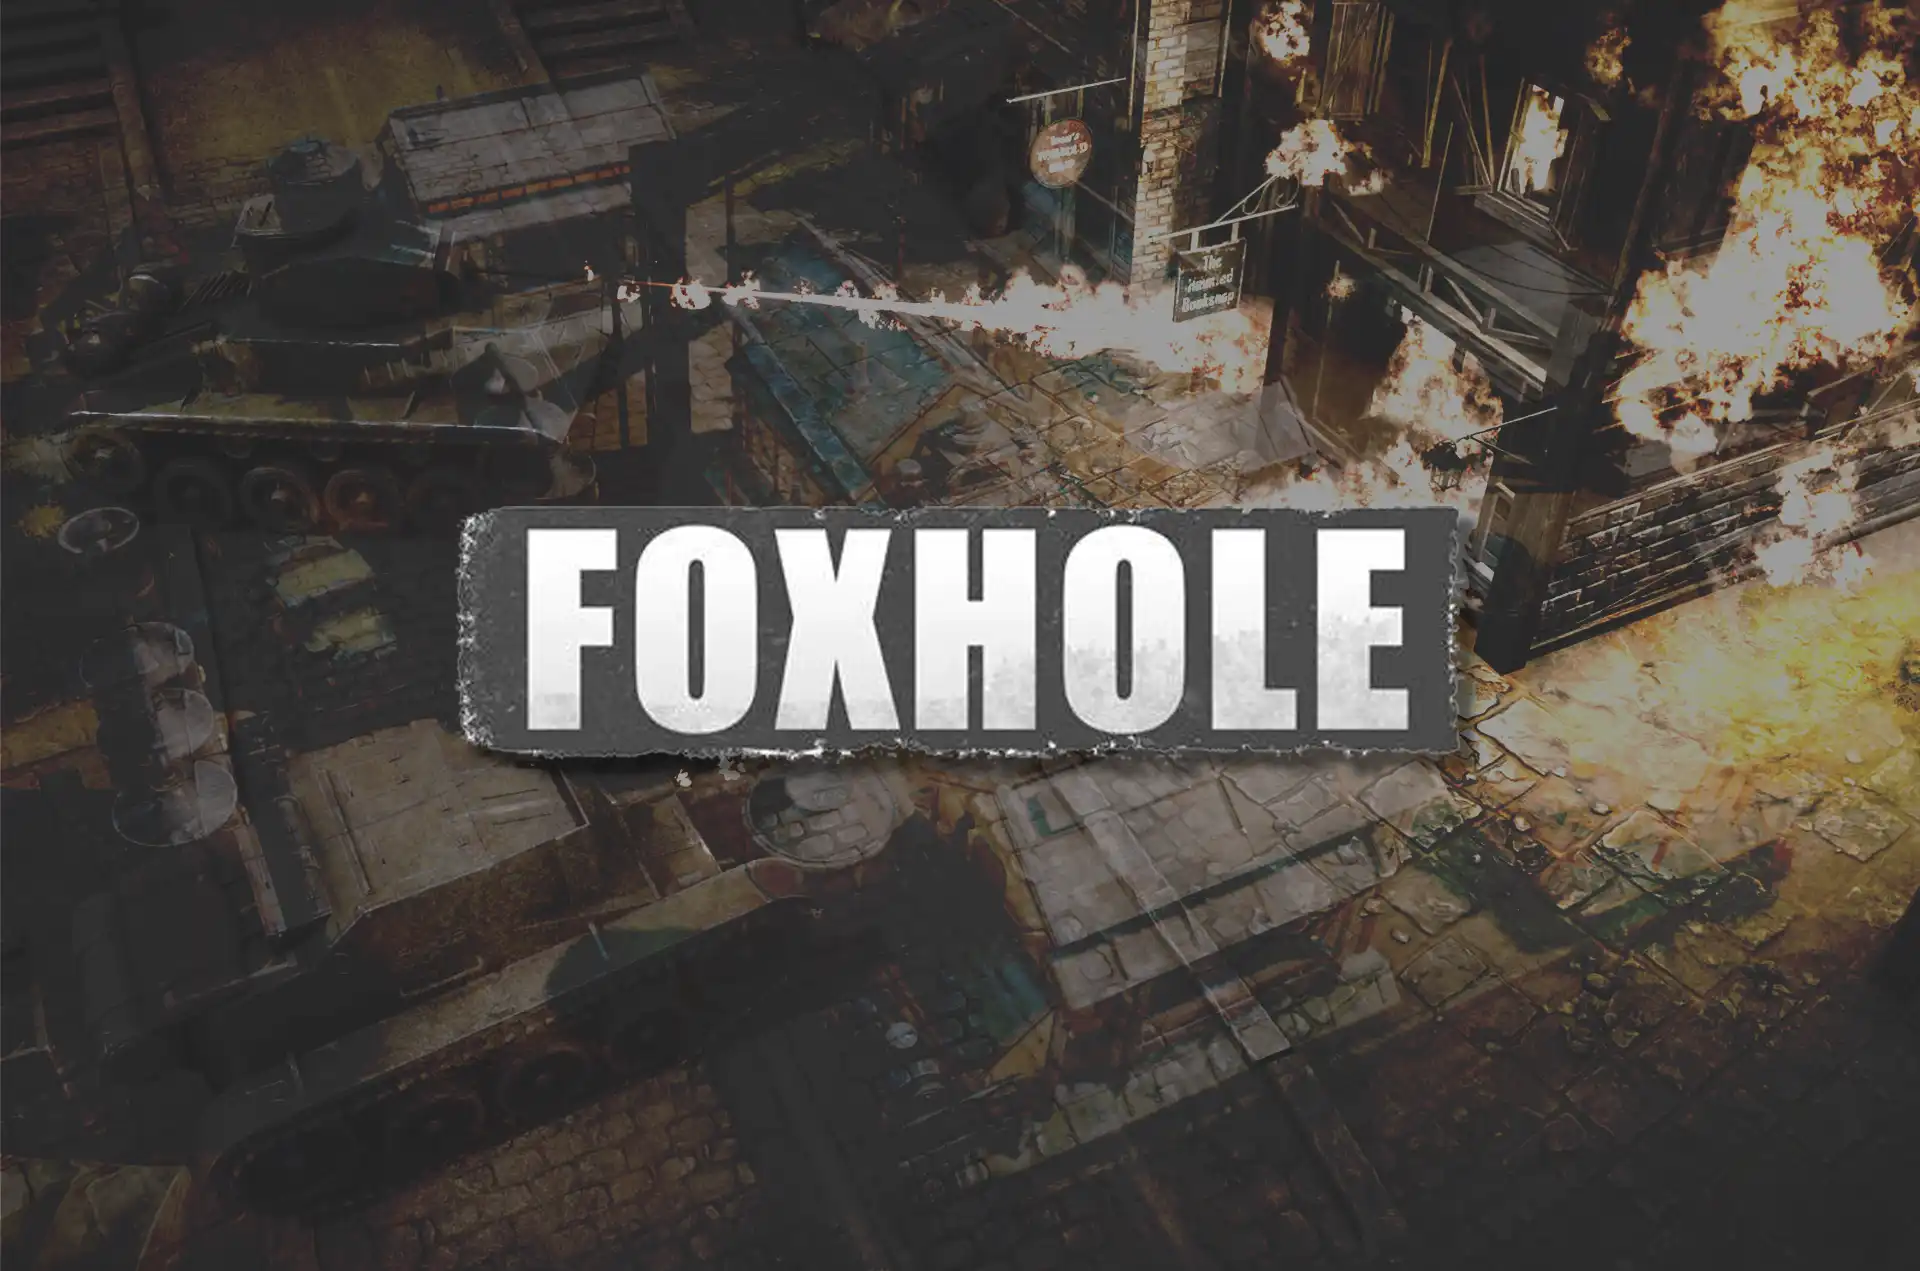 PRESENTING TO YOU FOXHOLE